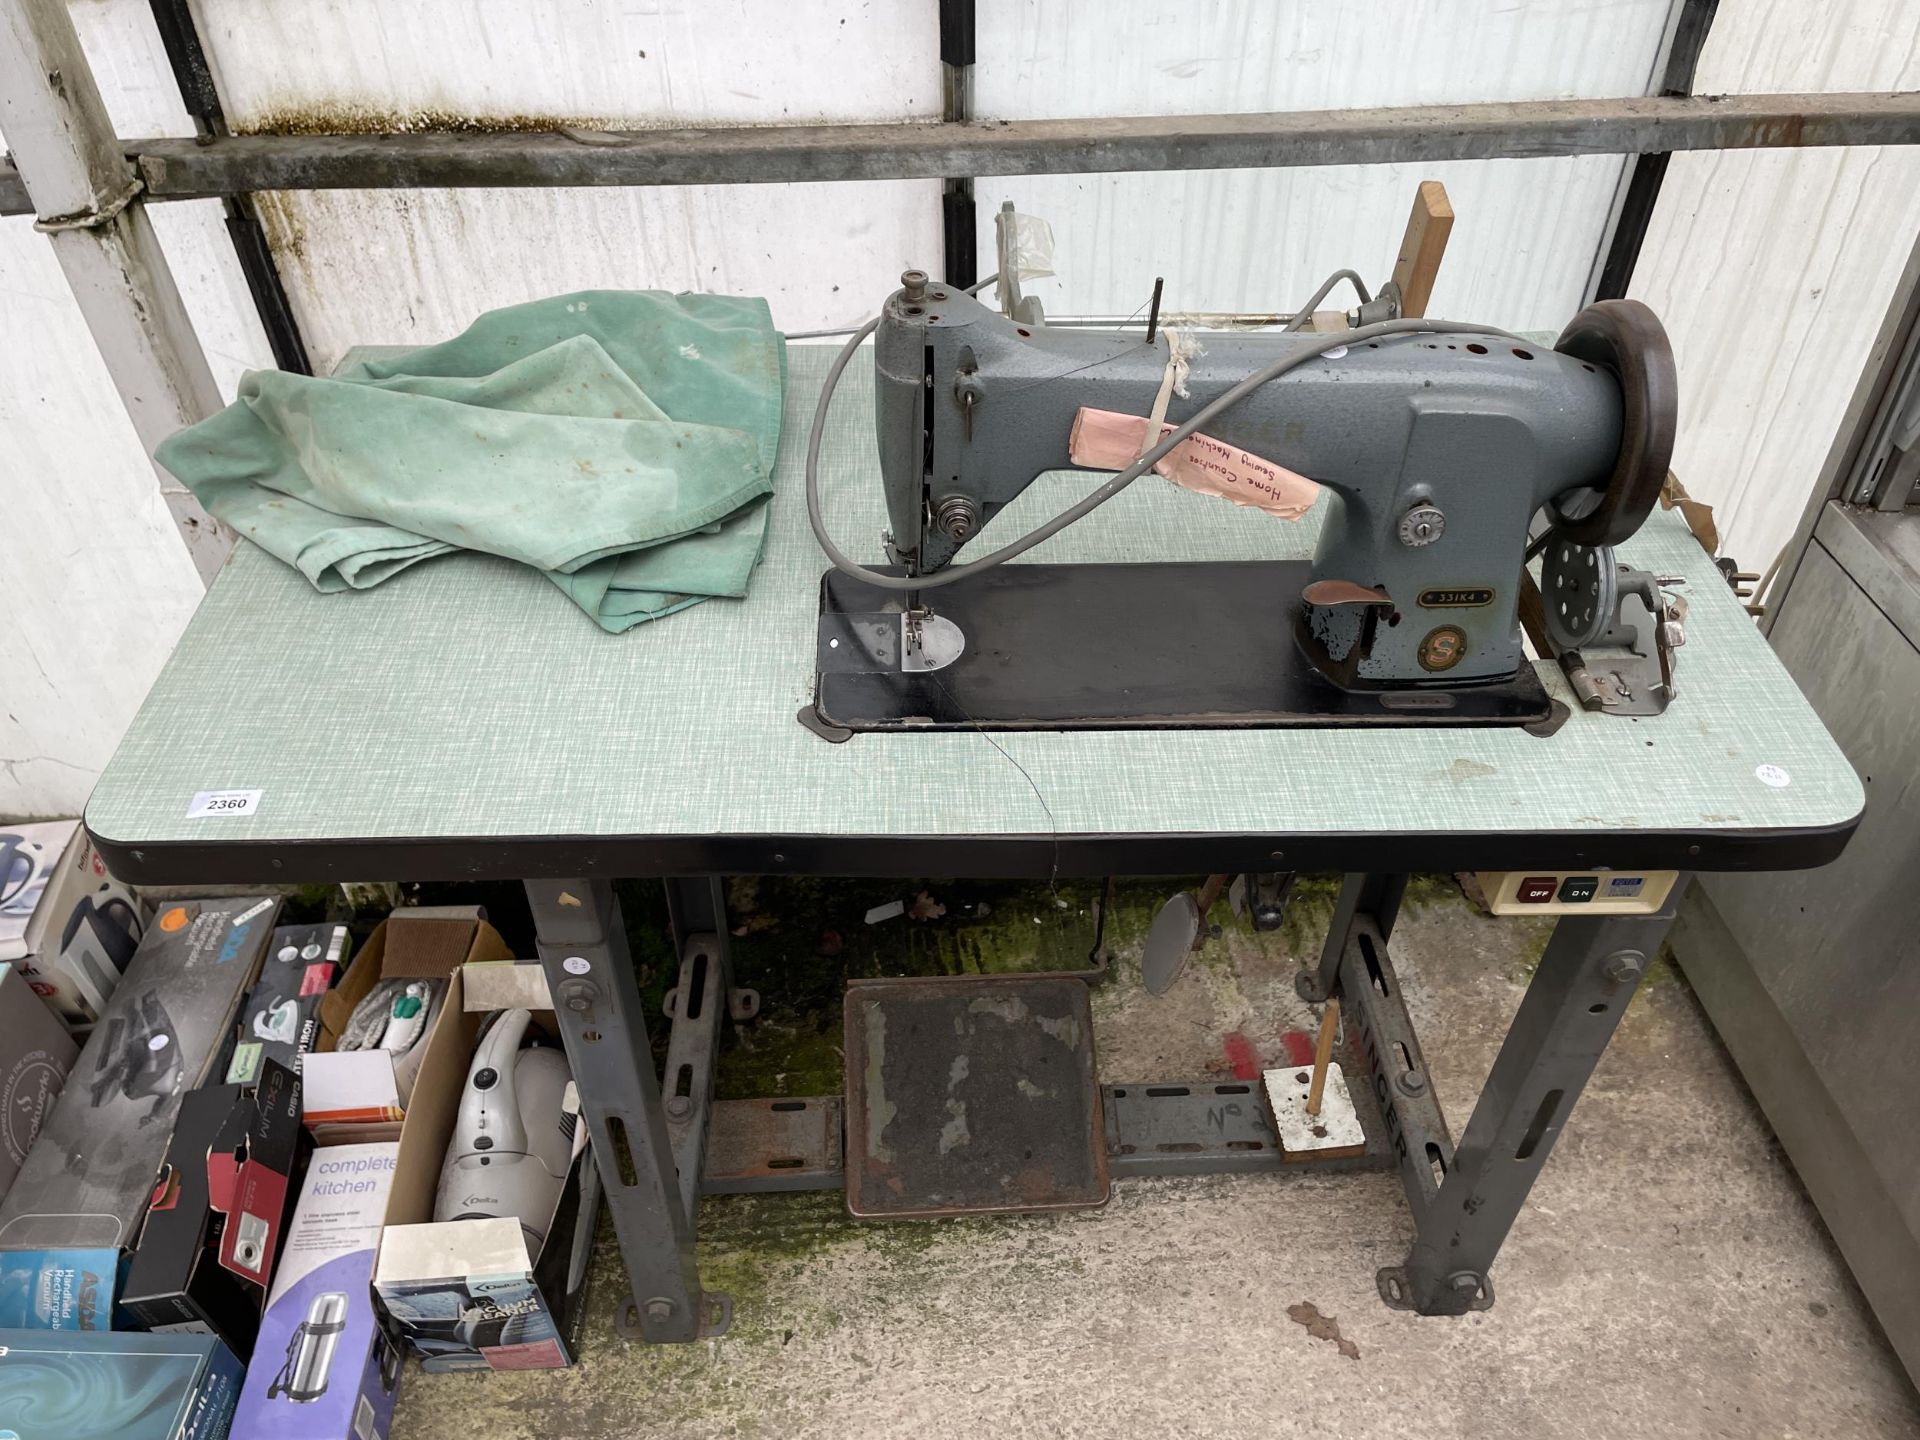 A VINTAGE SINGER INDUSTRIAL SEWING MACHINE WITH TREADLE BASE